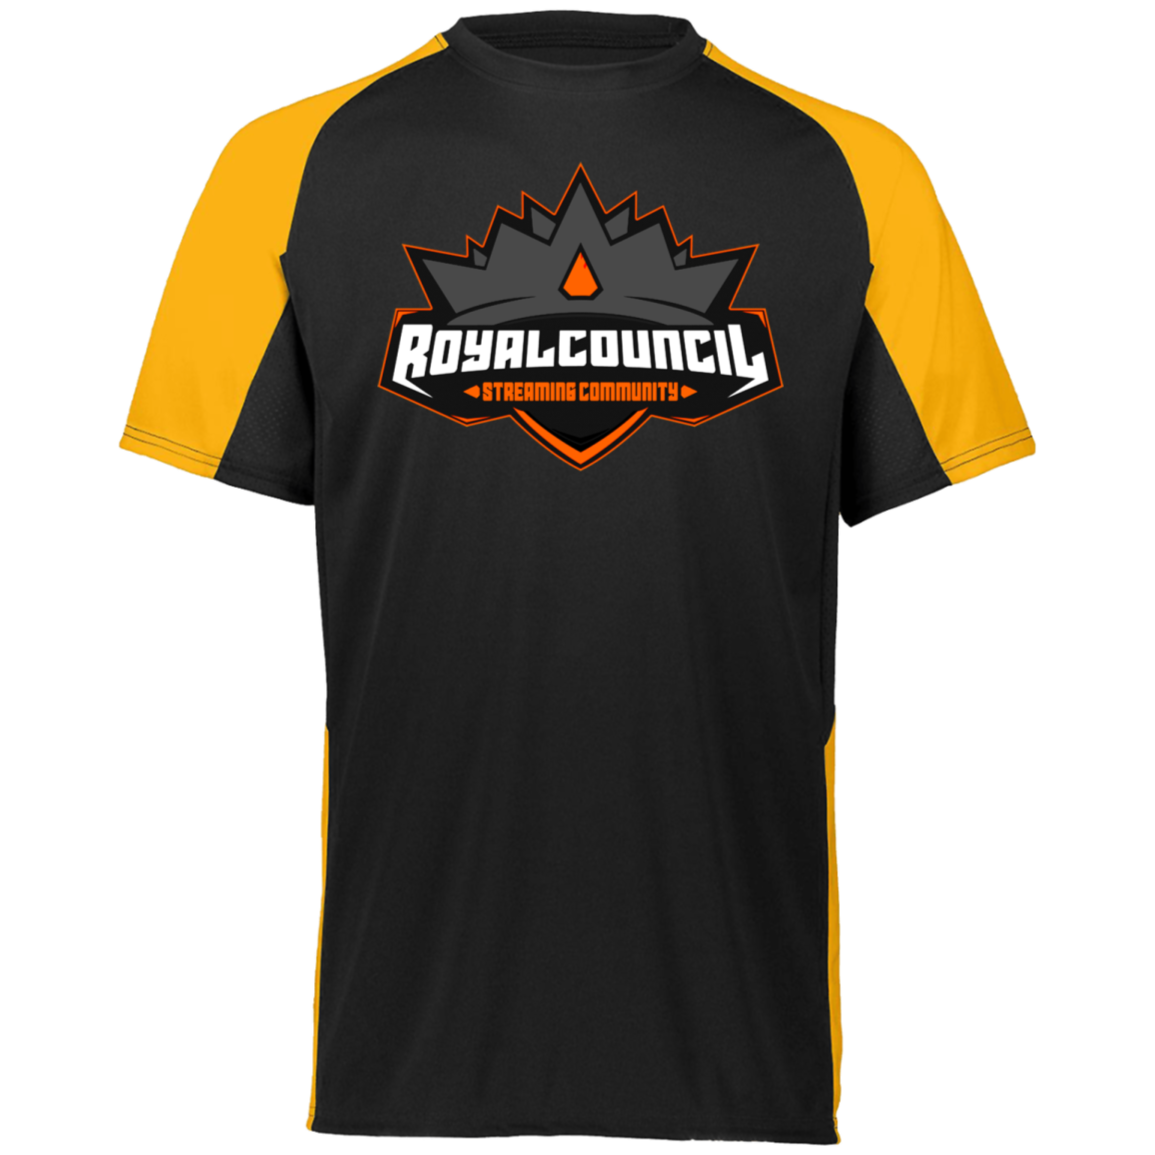 s-rc TEAM JERSEY WITH YOUR NAME ON THE BACK!